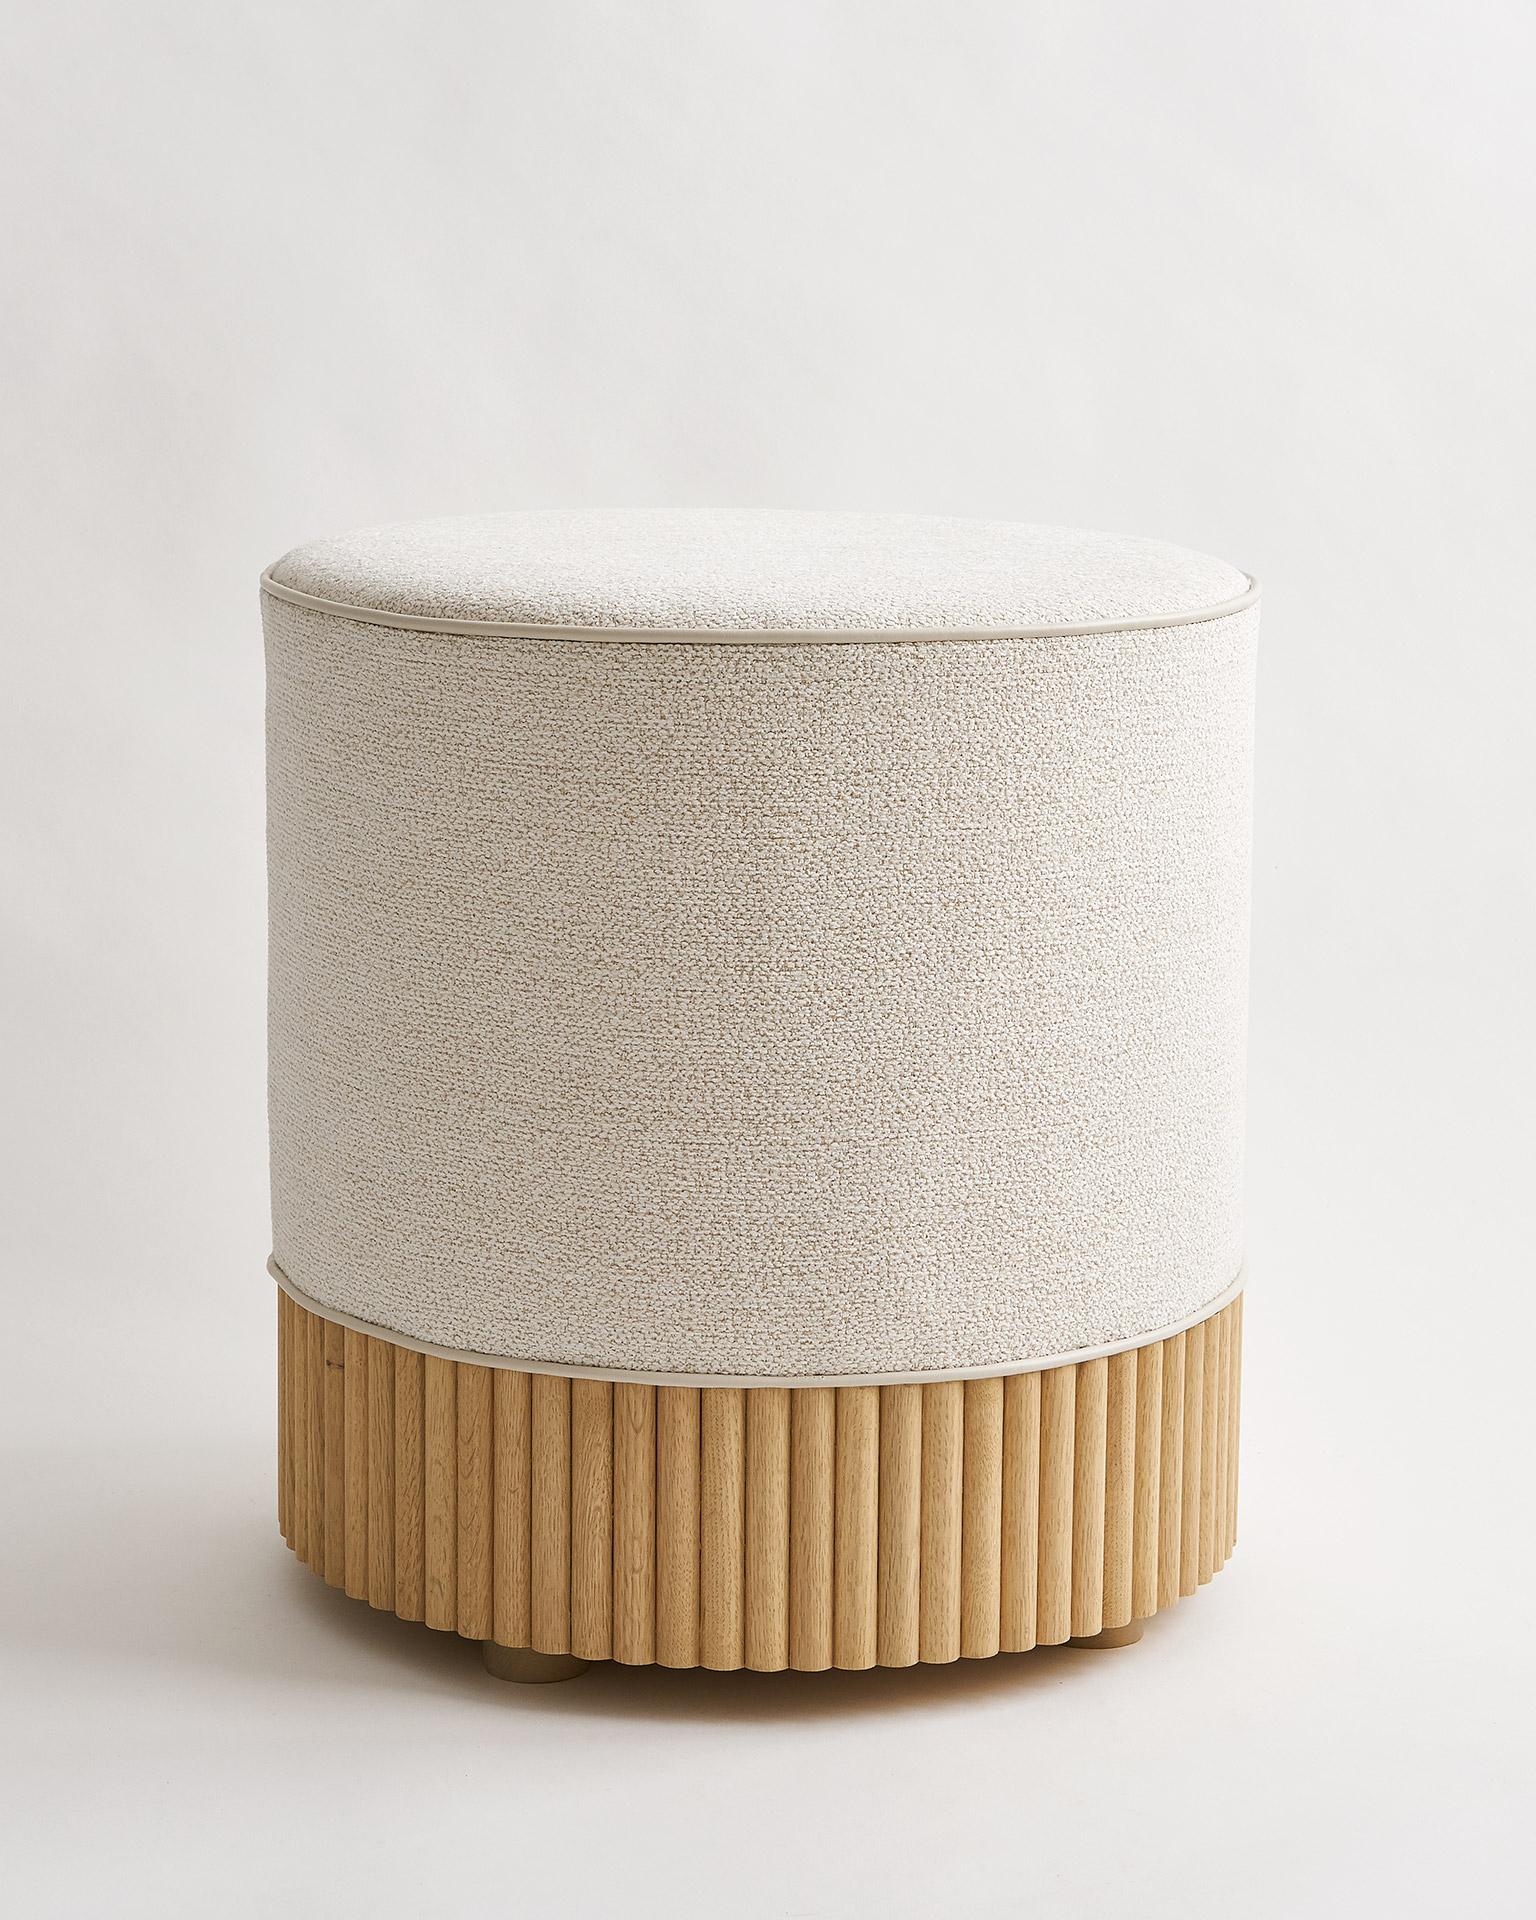 This customizable, made-to-order, modern round ottoman is part of the Studio Line collection, known as our Archer Ottoman. Upholstered in Kravet performance fabric. Includes vinyl piping detail along top with vertical white oak slat detailing at the